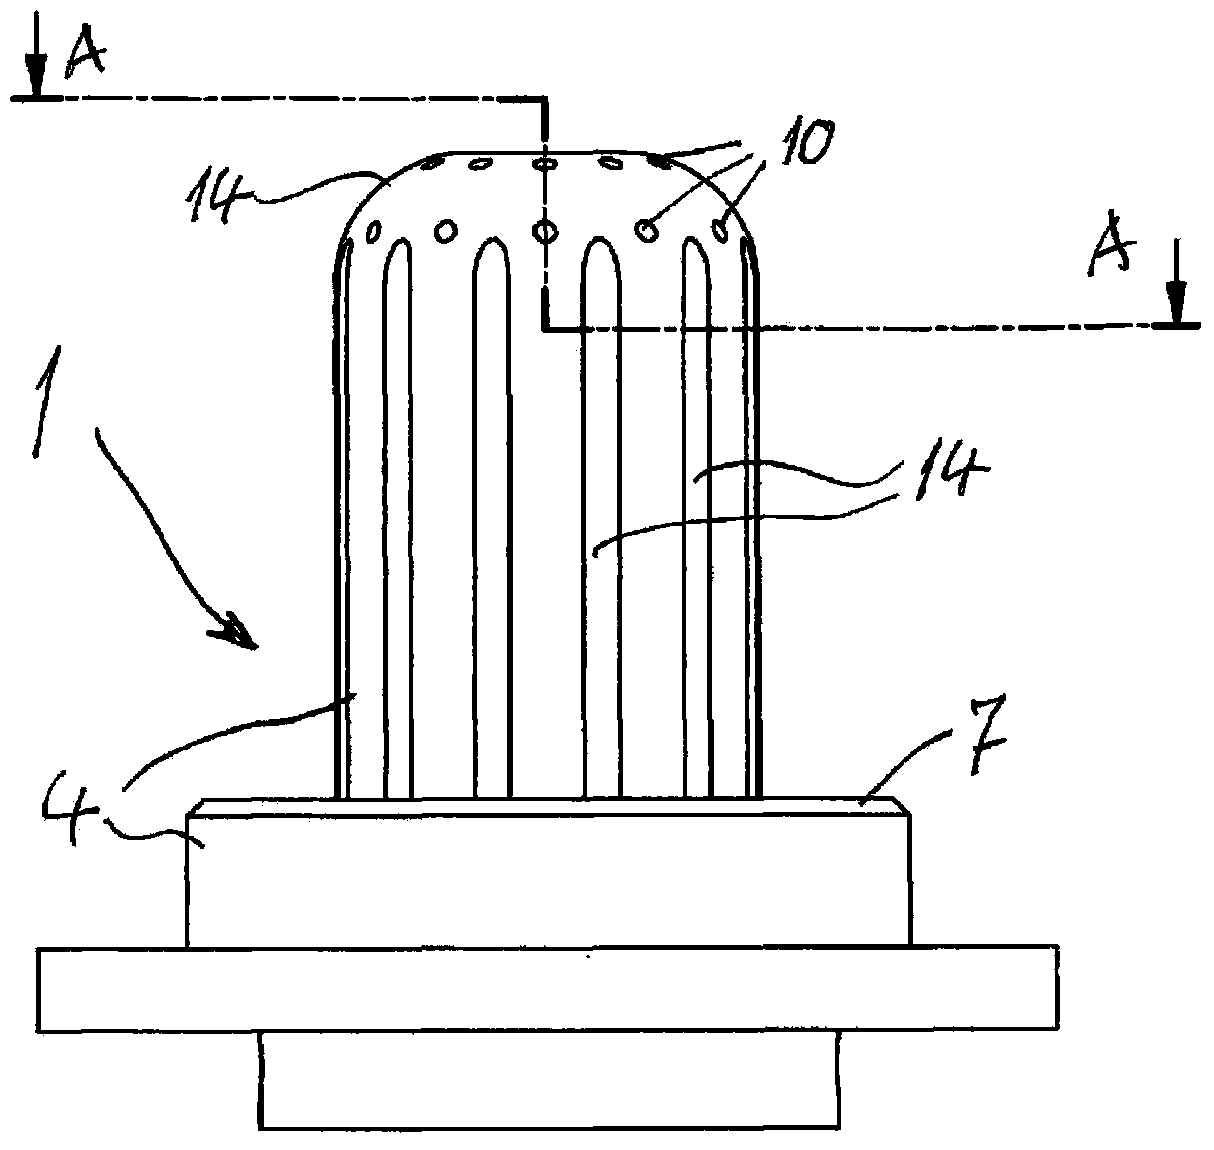 Process and apparatus for cooling a digestion vessel of a calorimeter after use